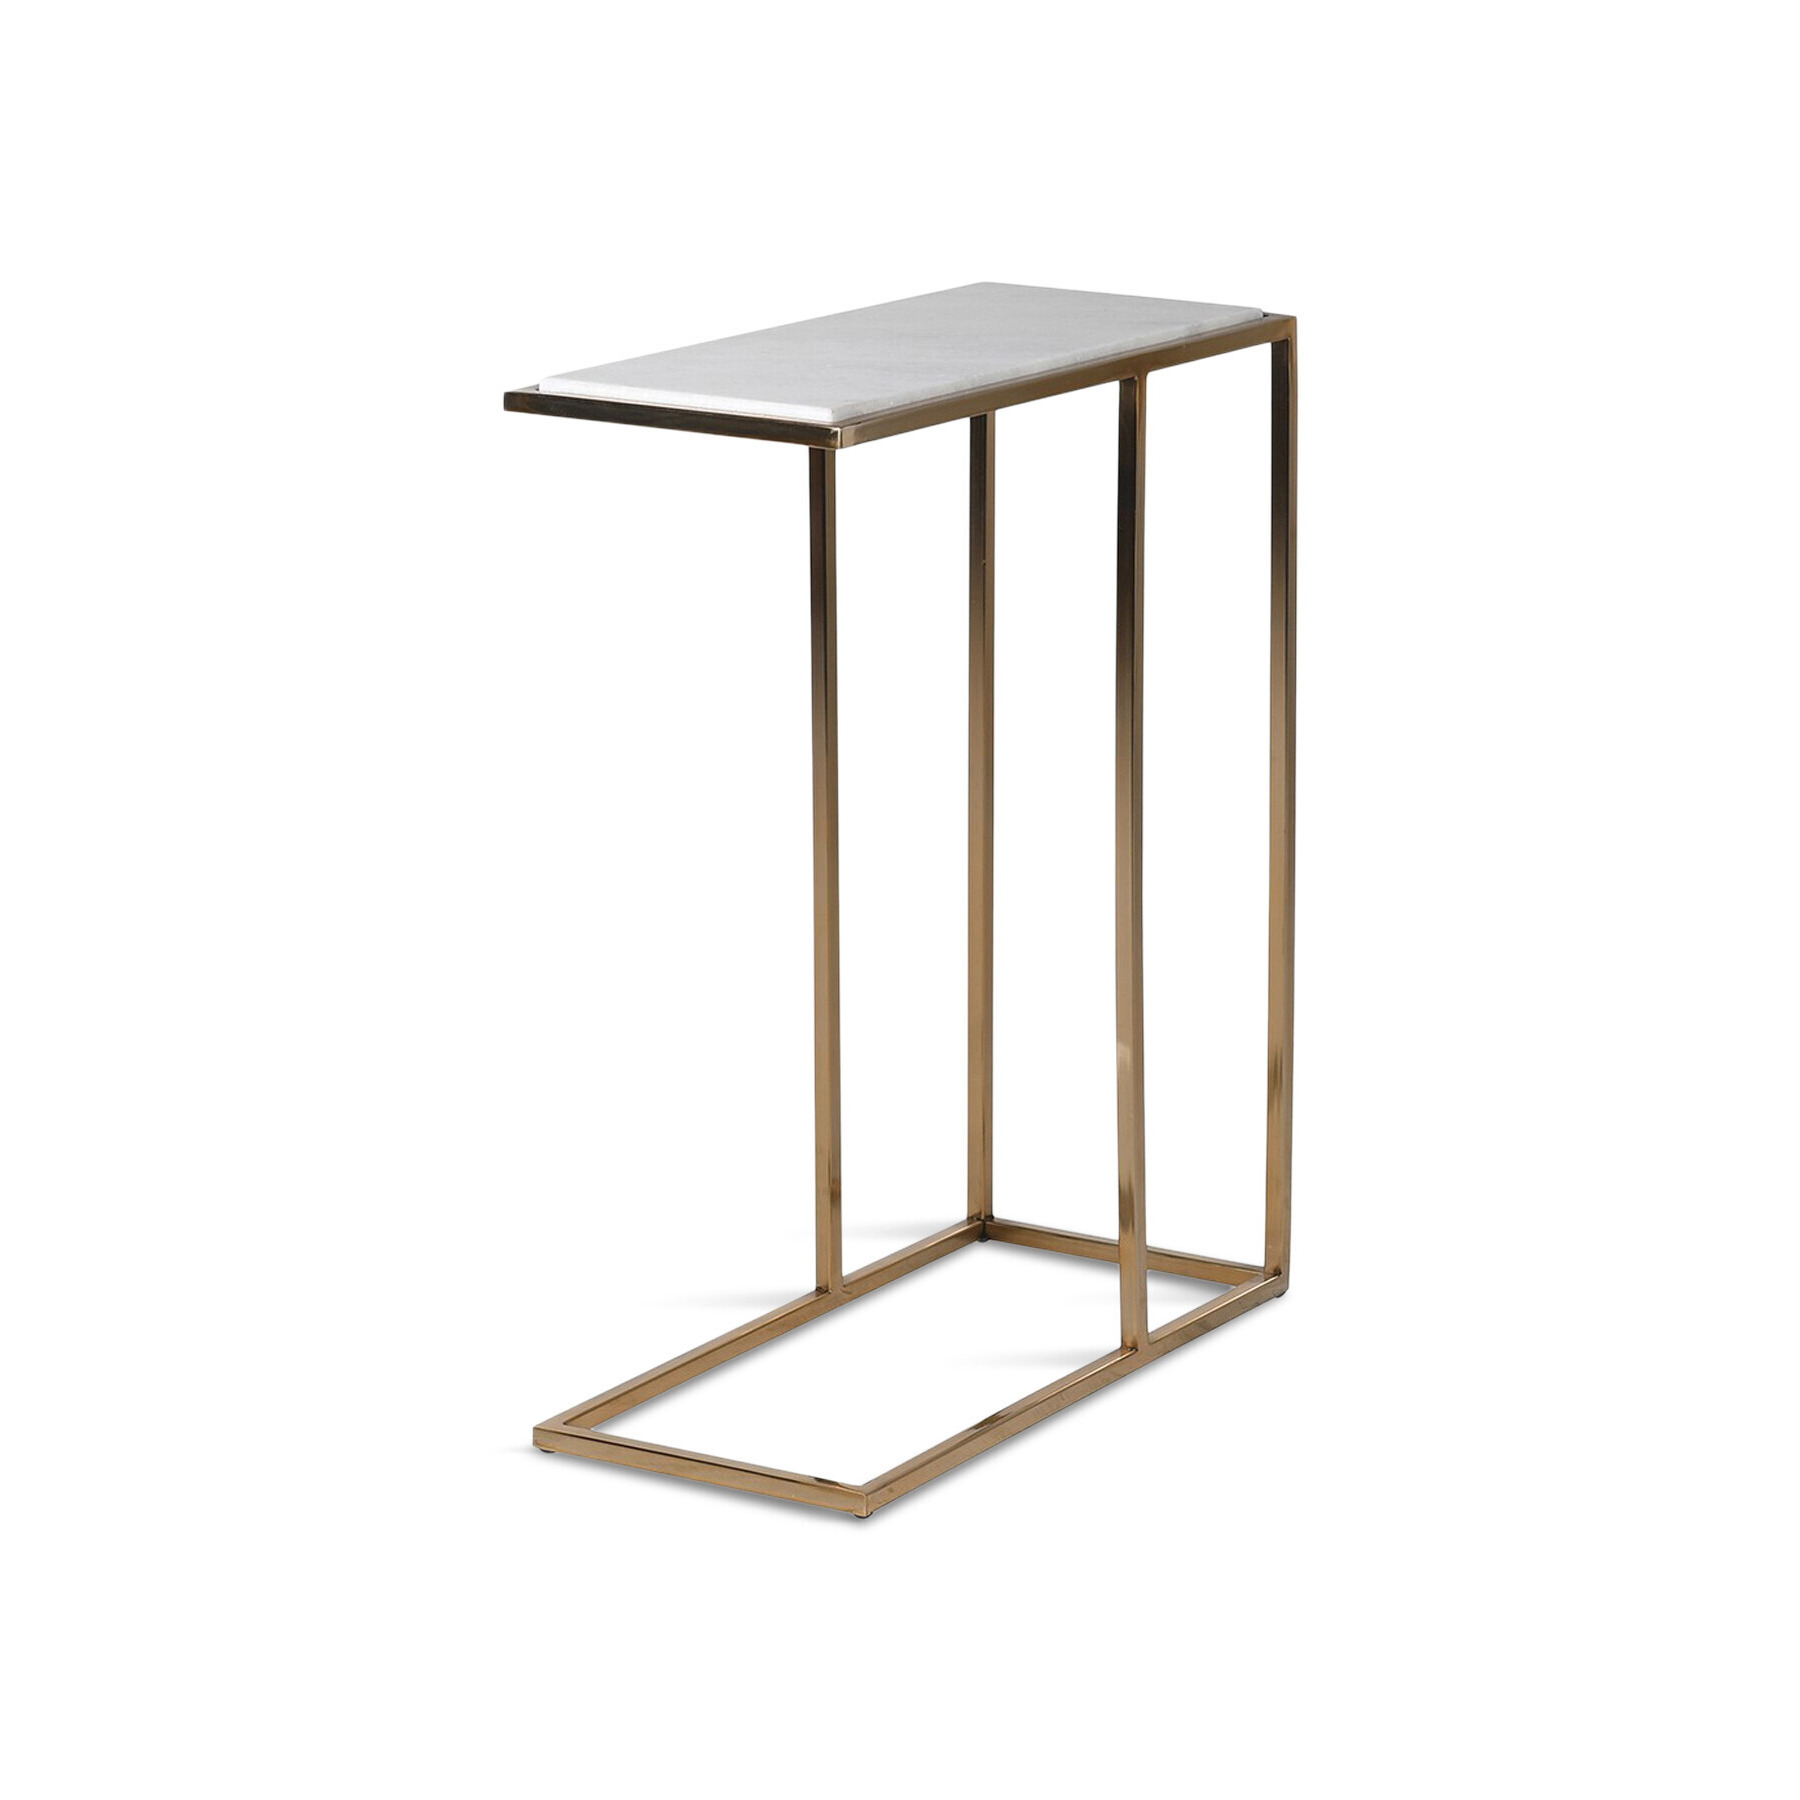 CHAIRS LTD OCCASIONAL  Large Gold curved console table